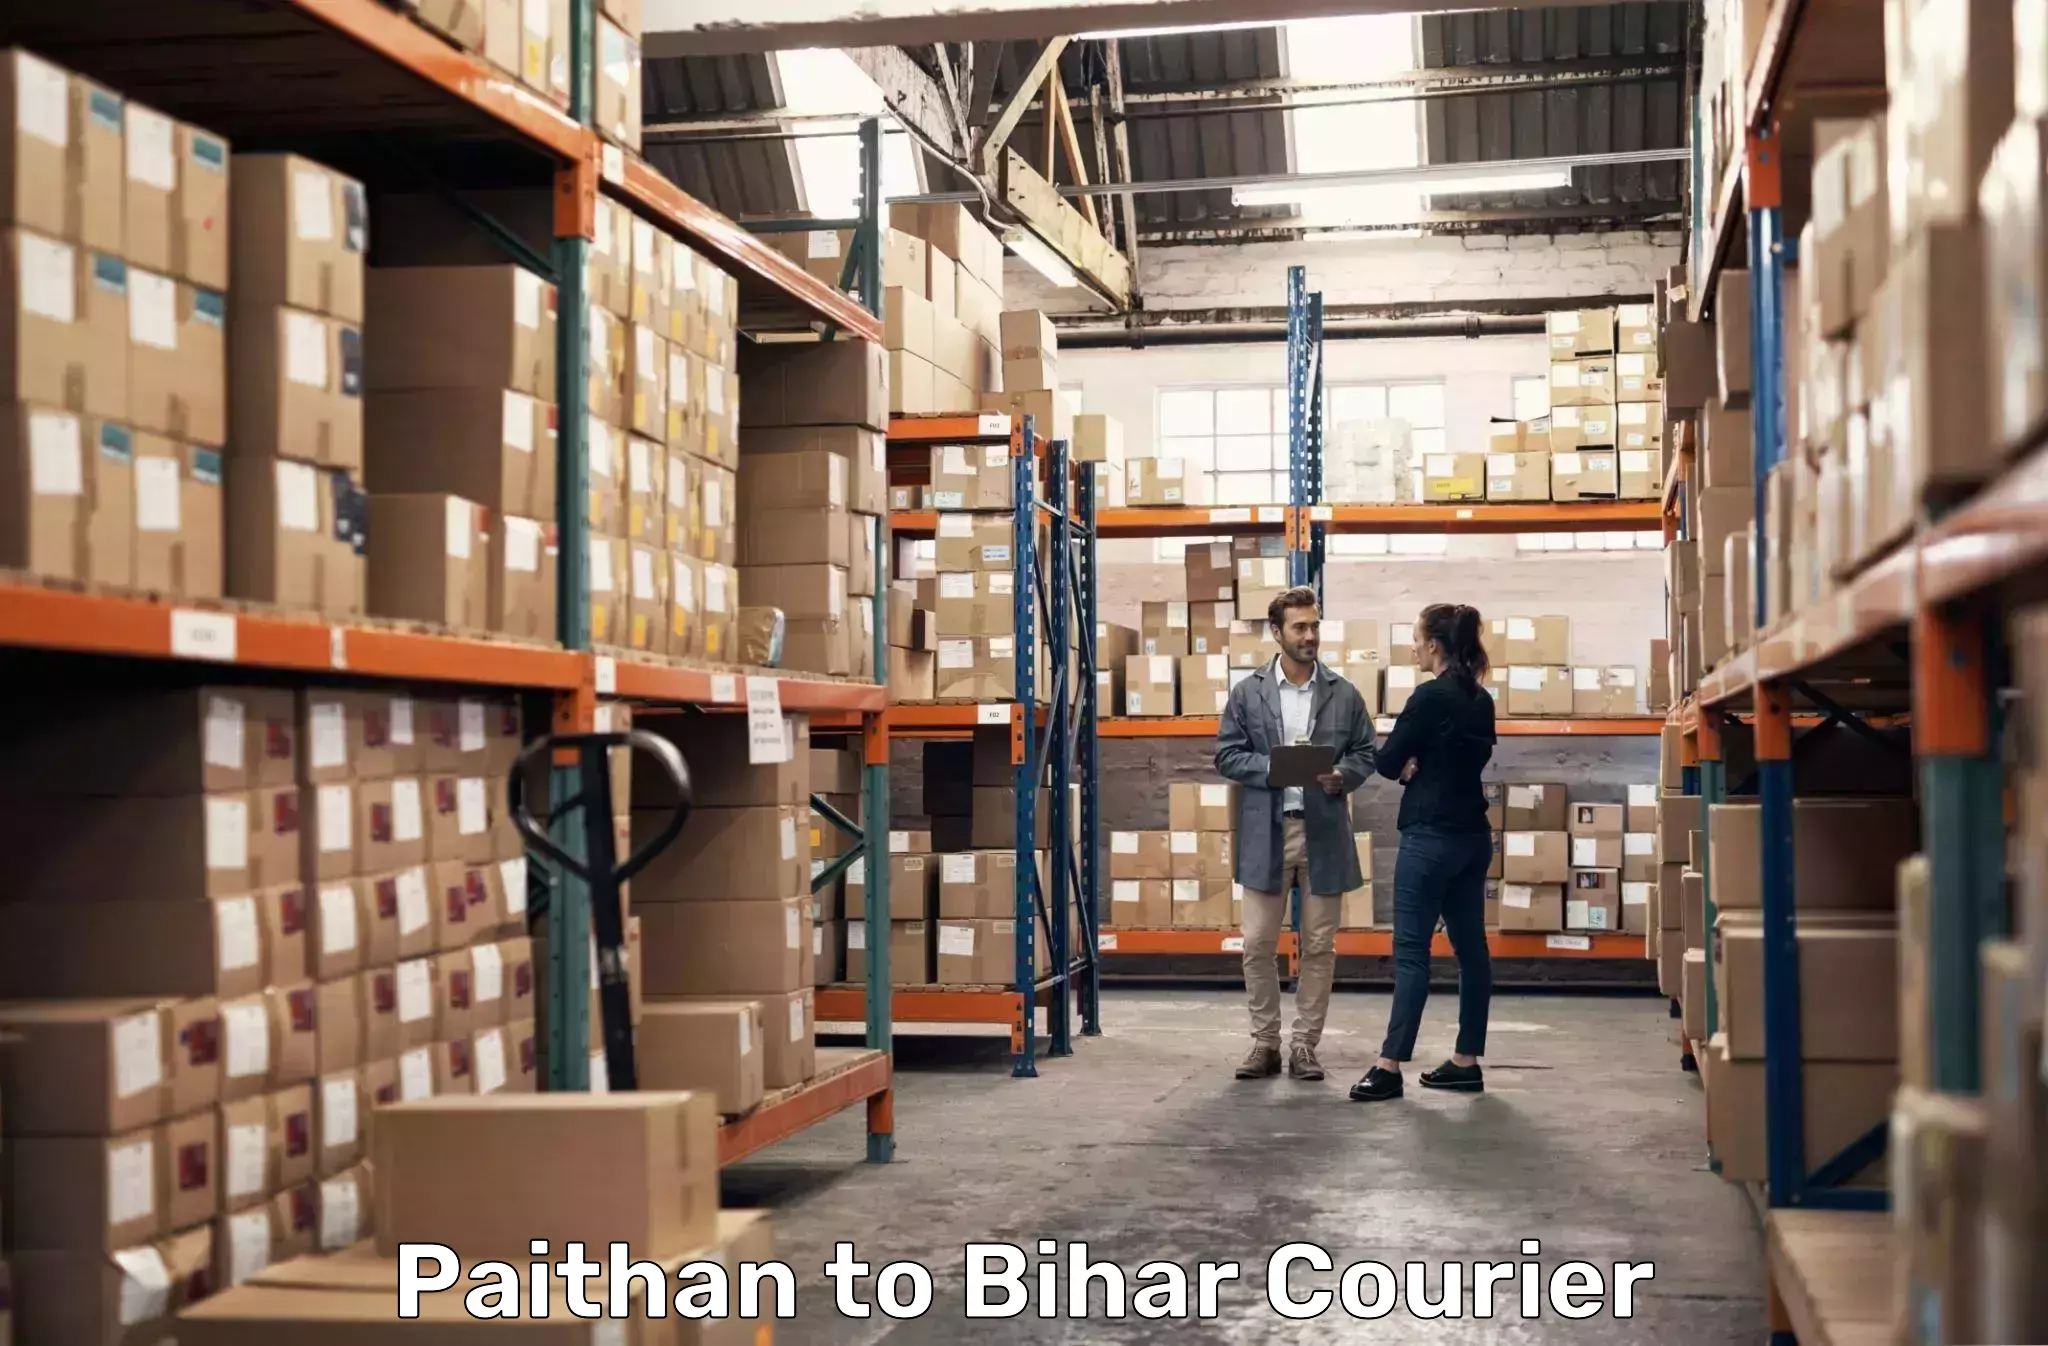 Speedy delivery service Paithan to Bihar